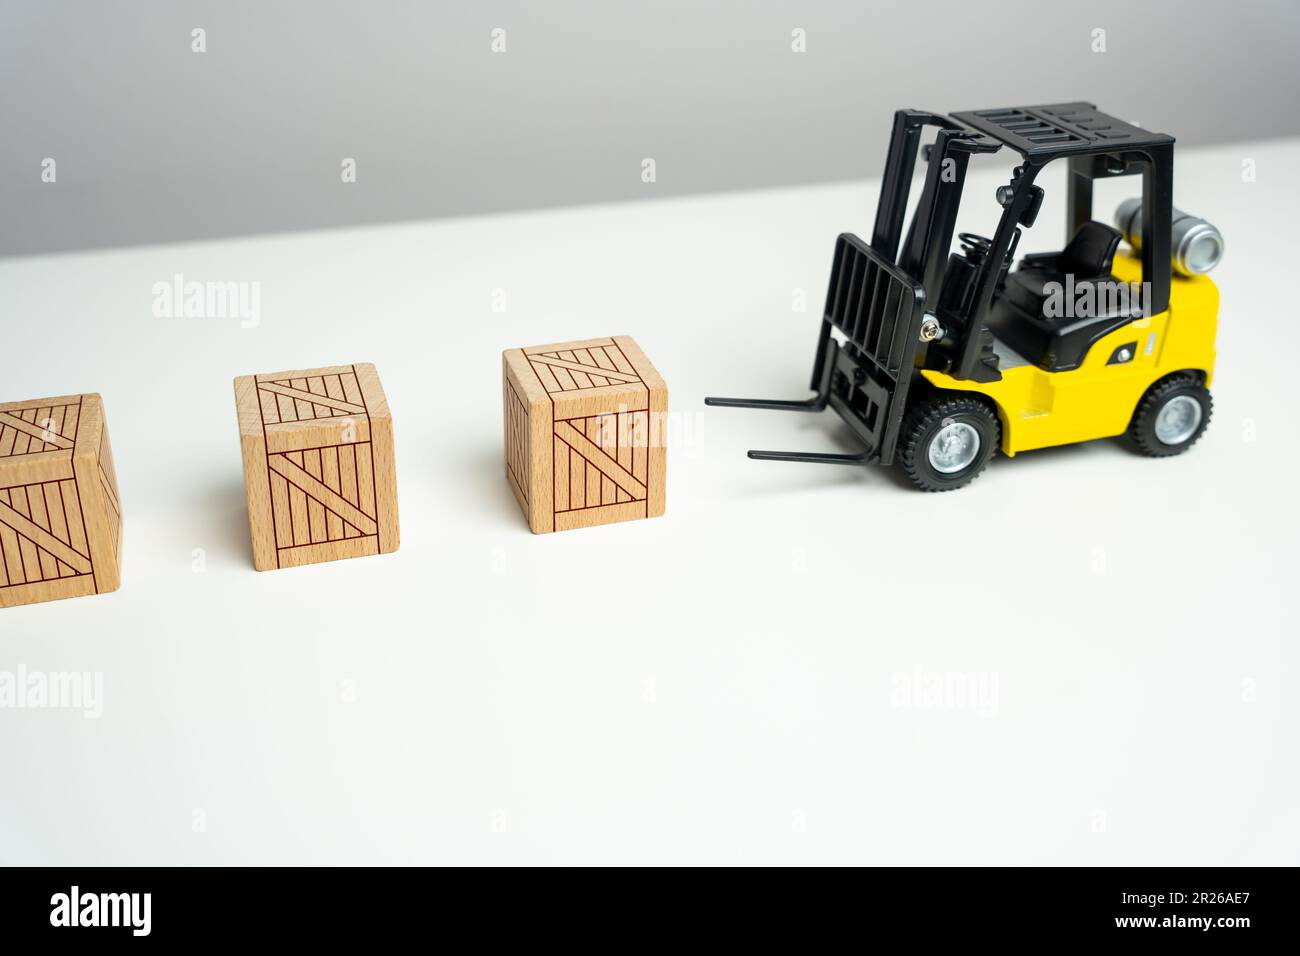 Wooden crates are picked up by a forklift. Preparation of order for shipment. Efficient process of preparing orders for shipment. It signifies the imp Stock Photo